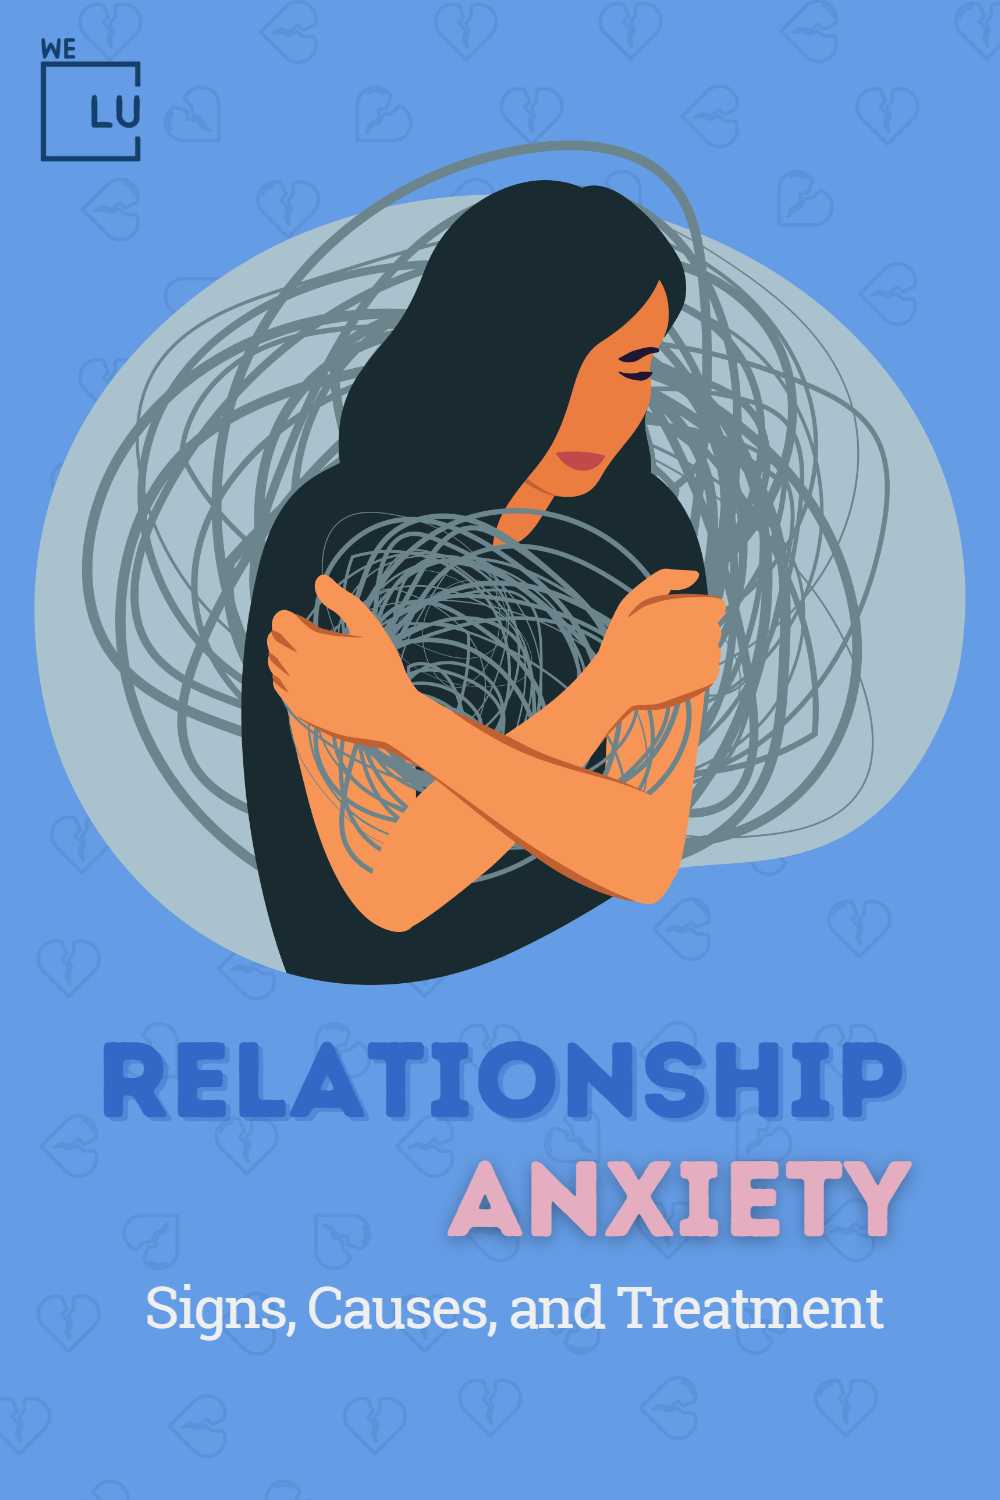 Relationship Anxiety, Signs, Causes, and Treatment